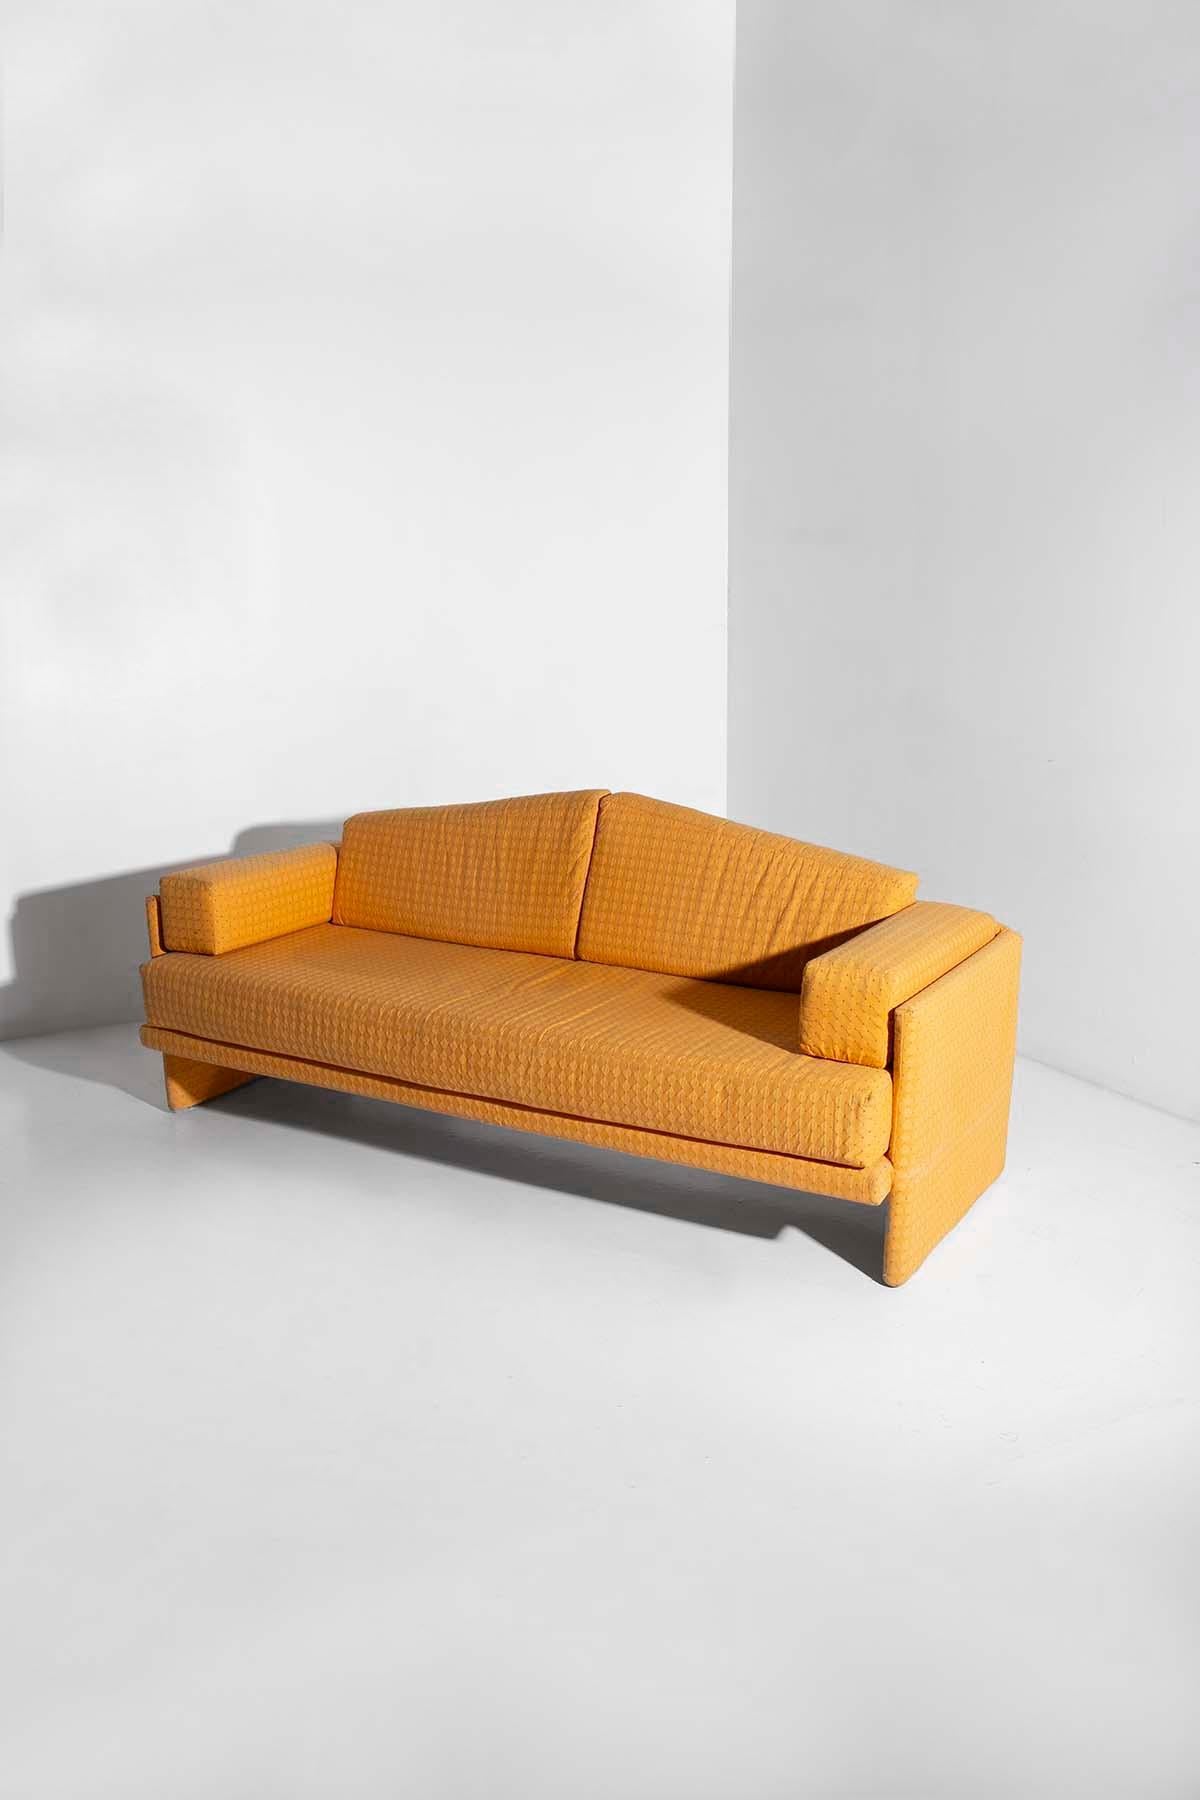 A journey back in time, straight to the dawn of innovation and creativity of the 1980s, this Italian vintage sofa is a celebration of the design that revolutionized contemporary furniture. Upholstered in a yellow quilted fabric, adorned with